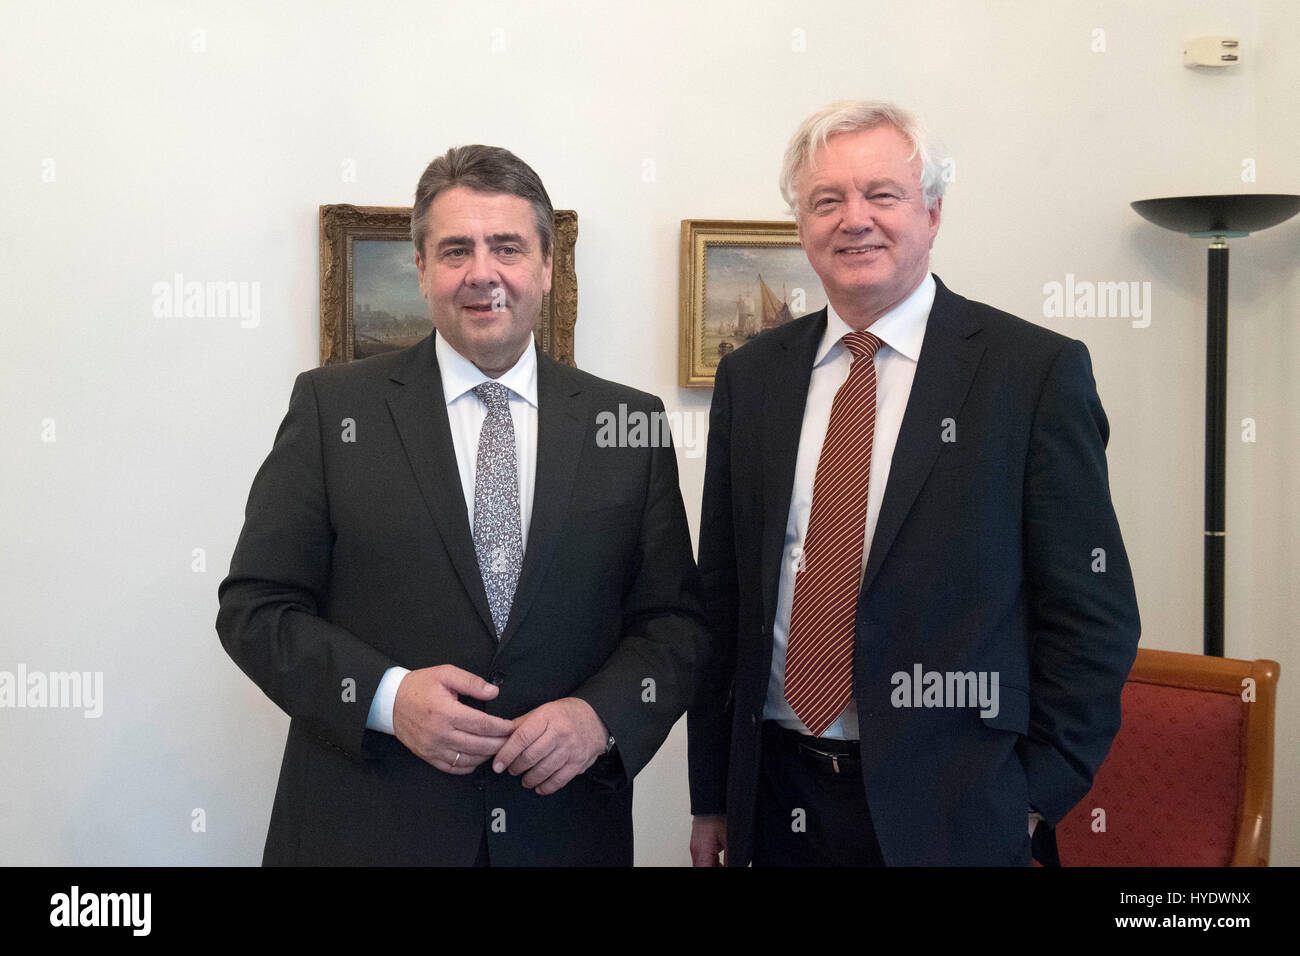 David Davis (right), the Secretary of State for the Department for Exiting the European Union, meets with the German Foreign Minister Sigmar Gabriel at the Cabinet Office, London for talks. Stock Photo